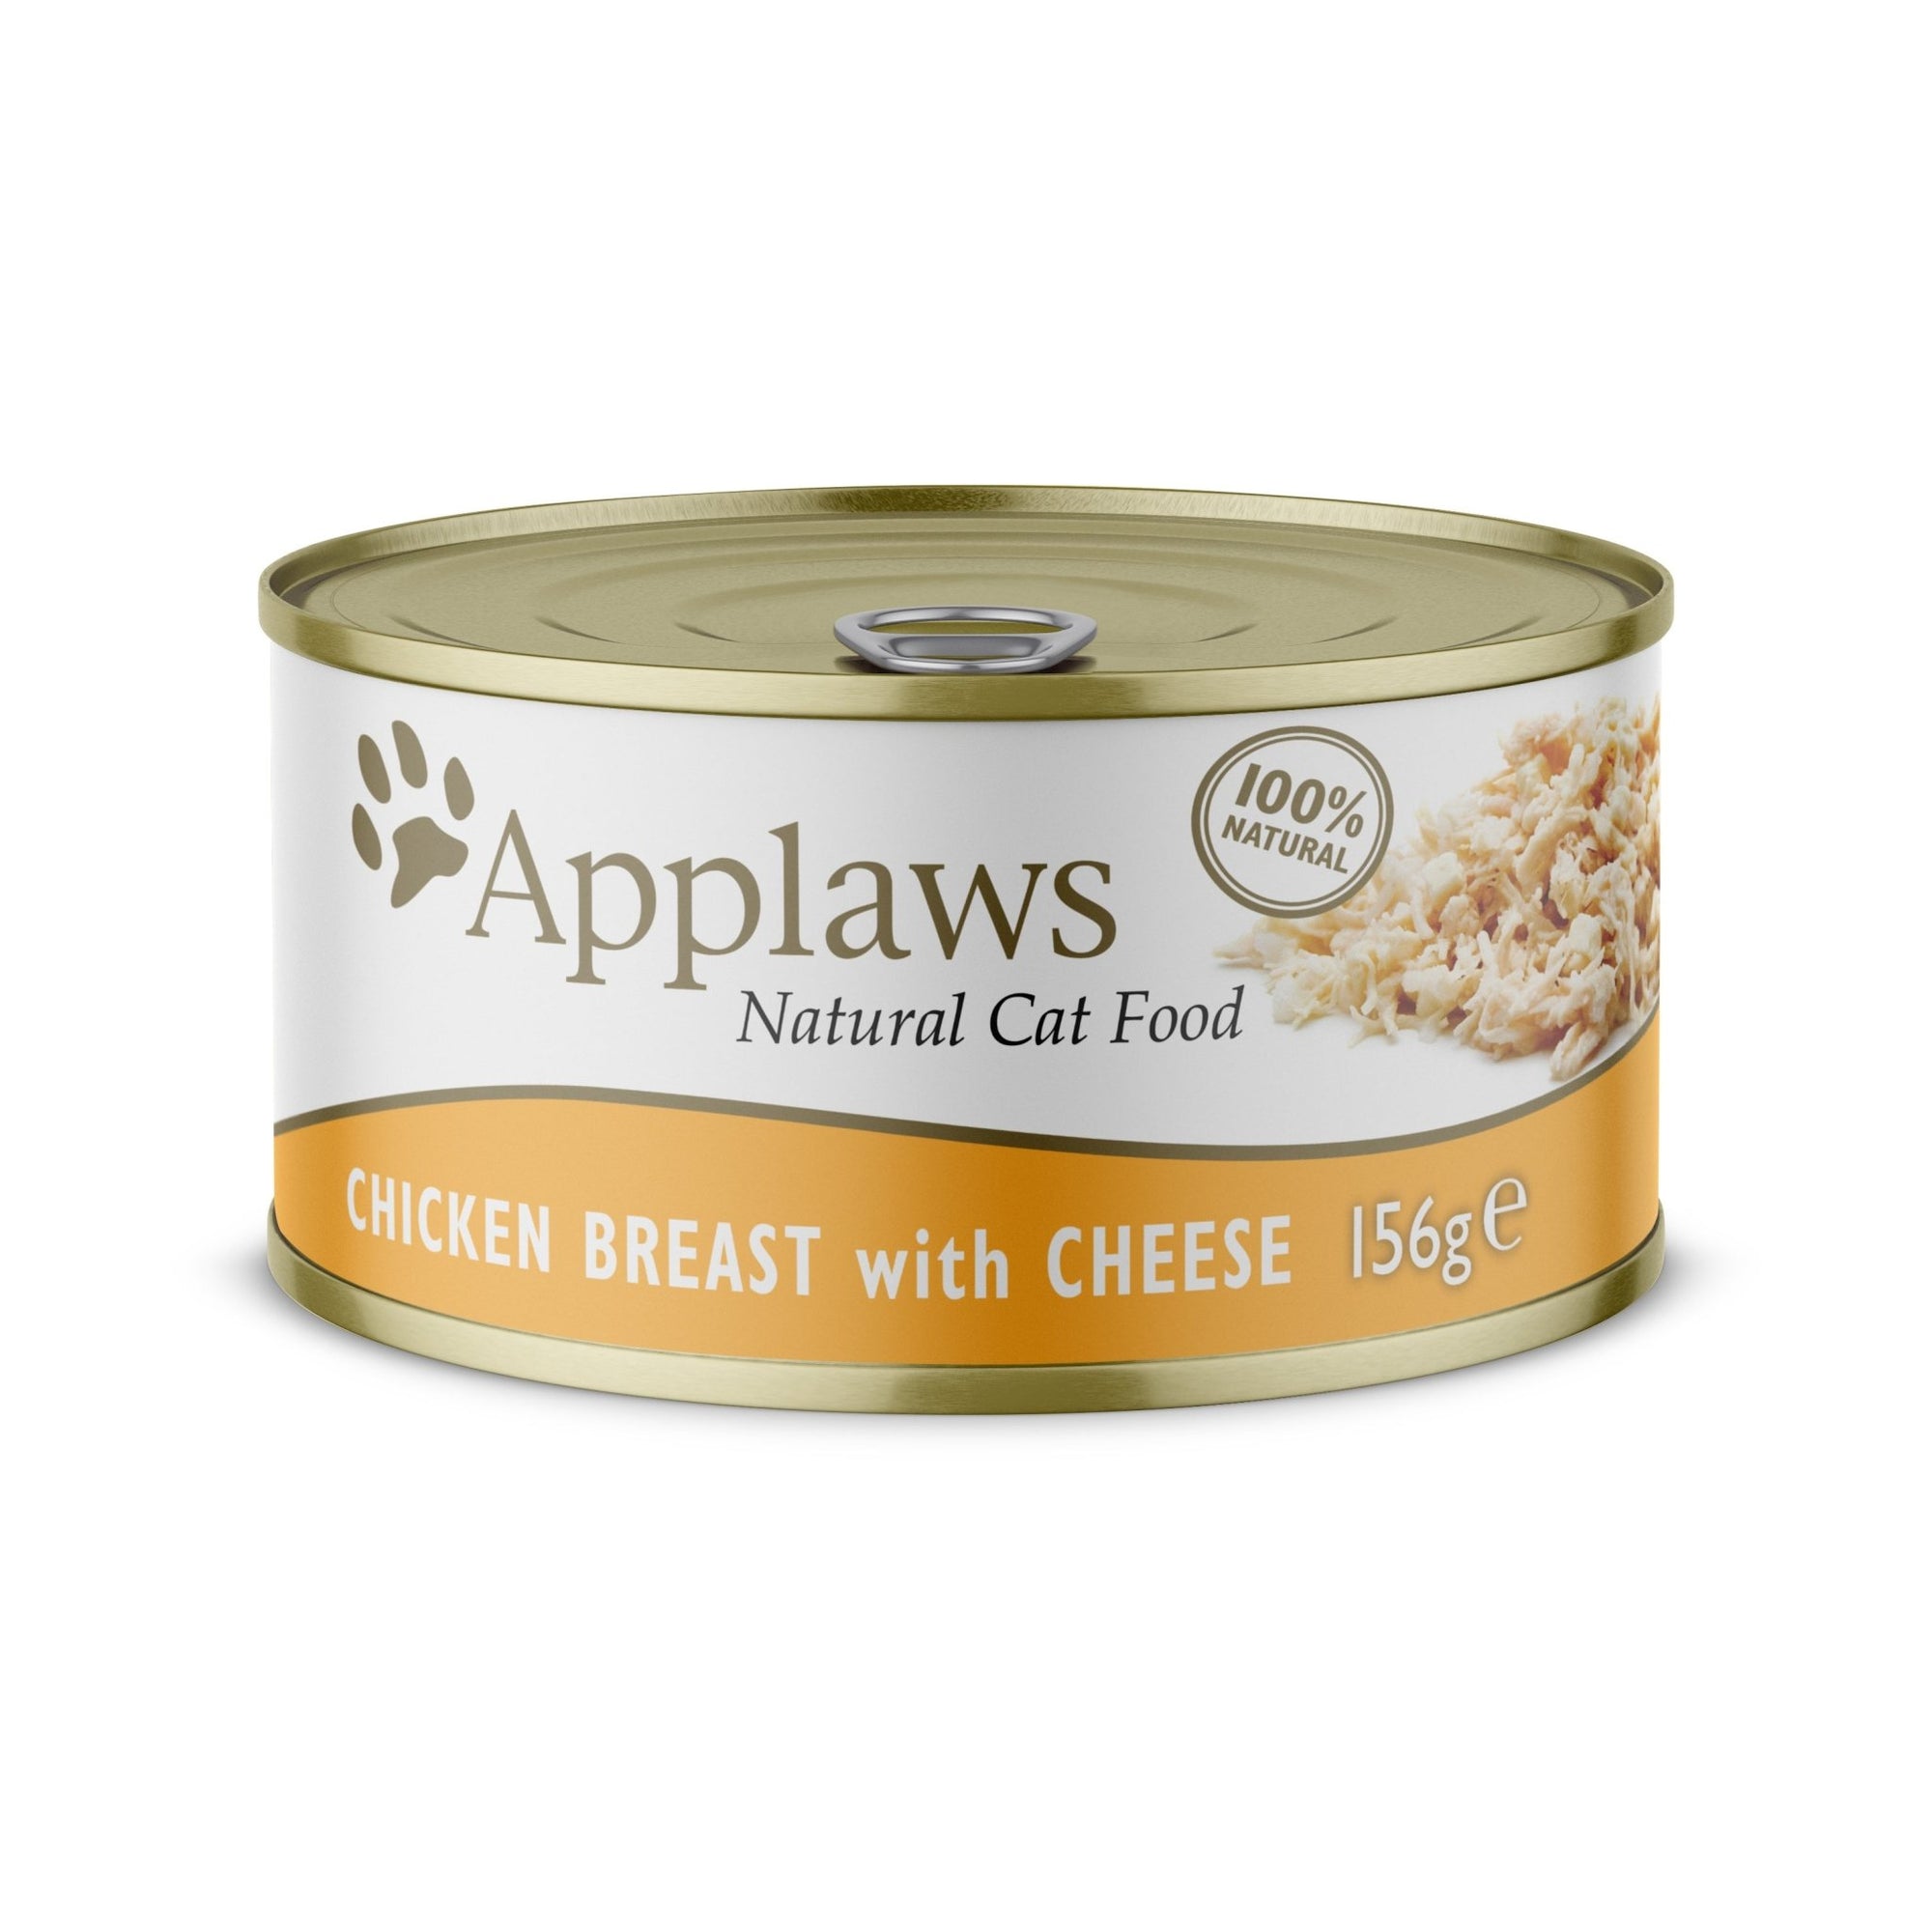 Applaws Cat Chicken Breast with Cheese in Broth Tins, Applaws, 24x156g